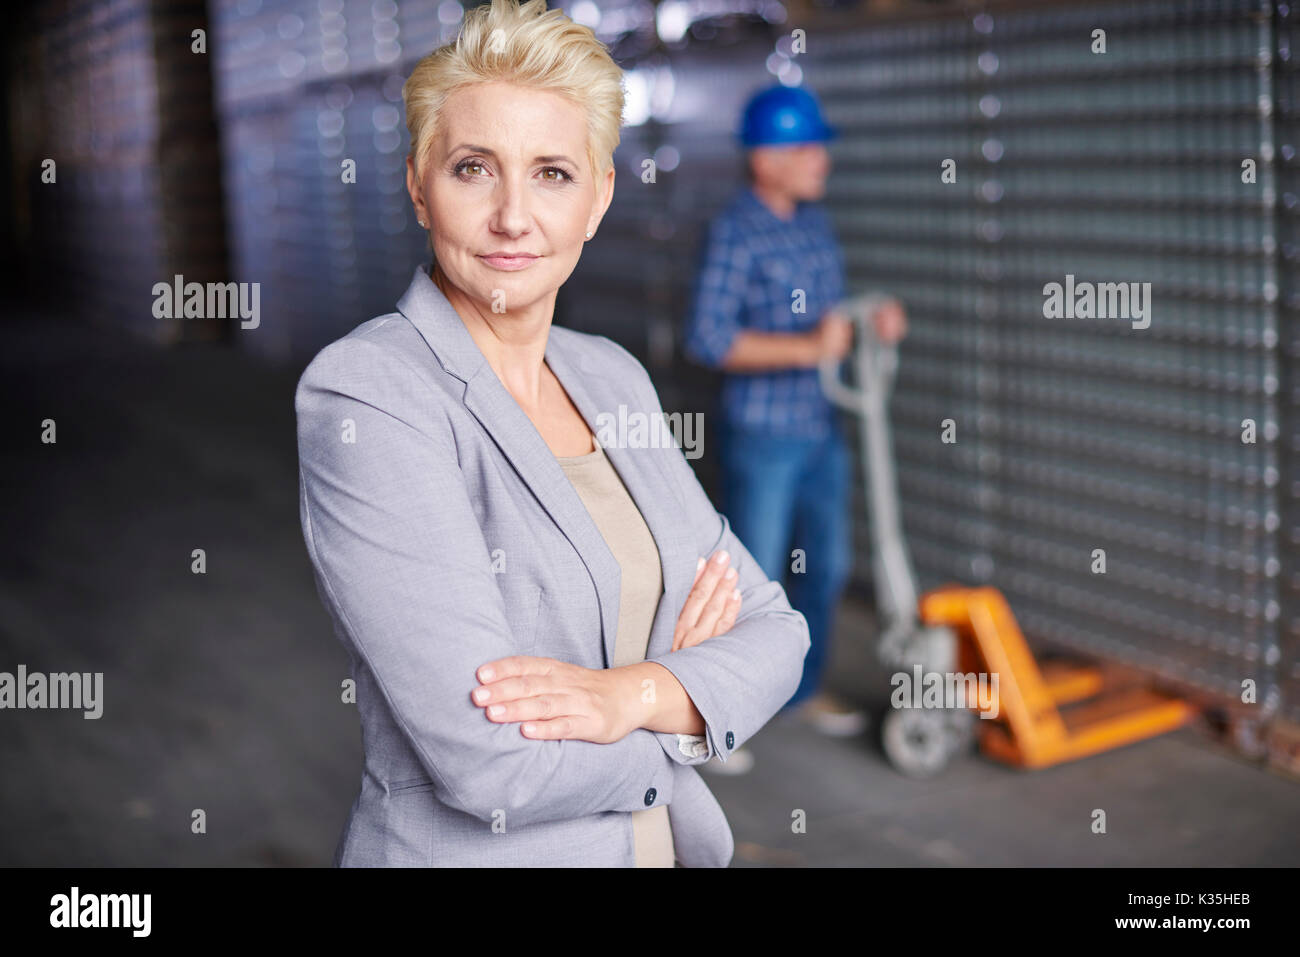 Professionelle Manager im Lager Stockfoto